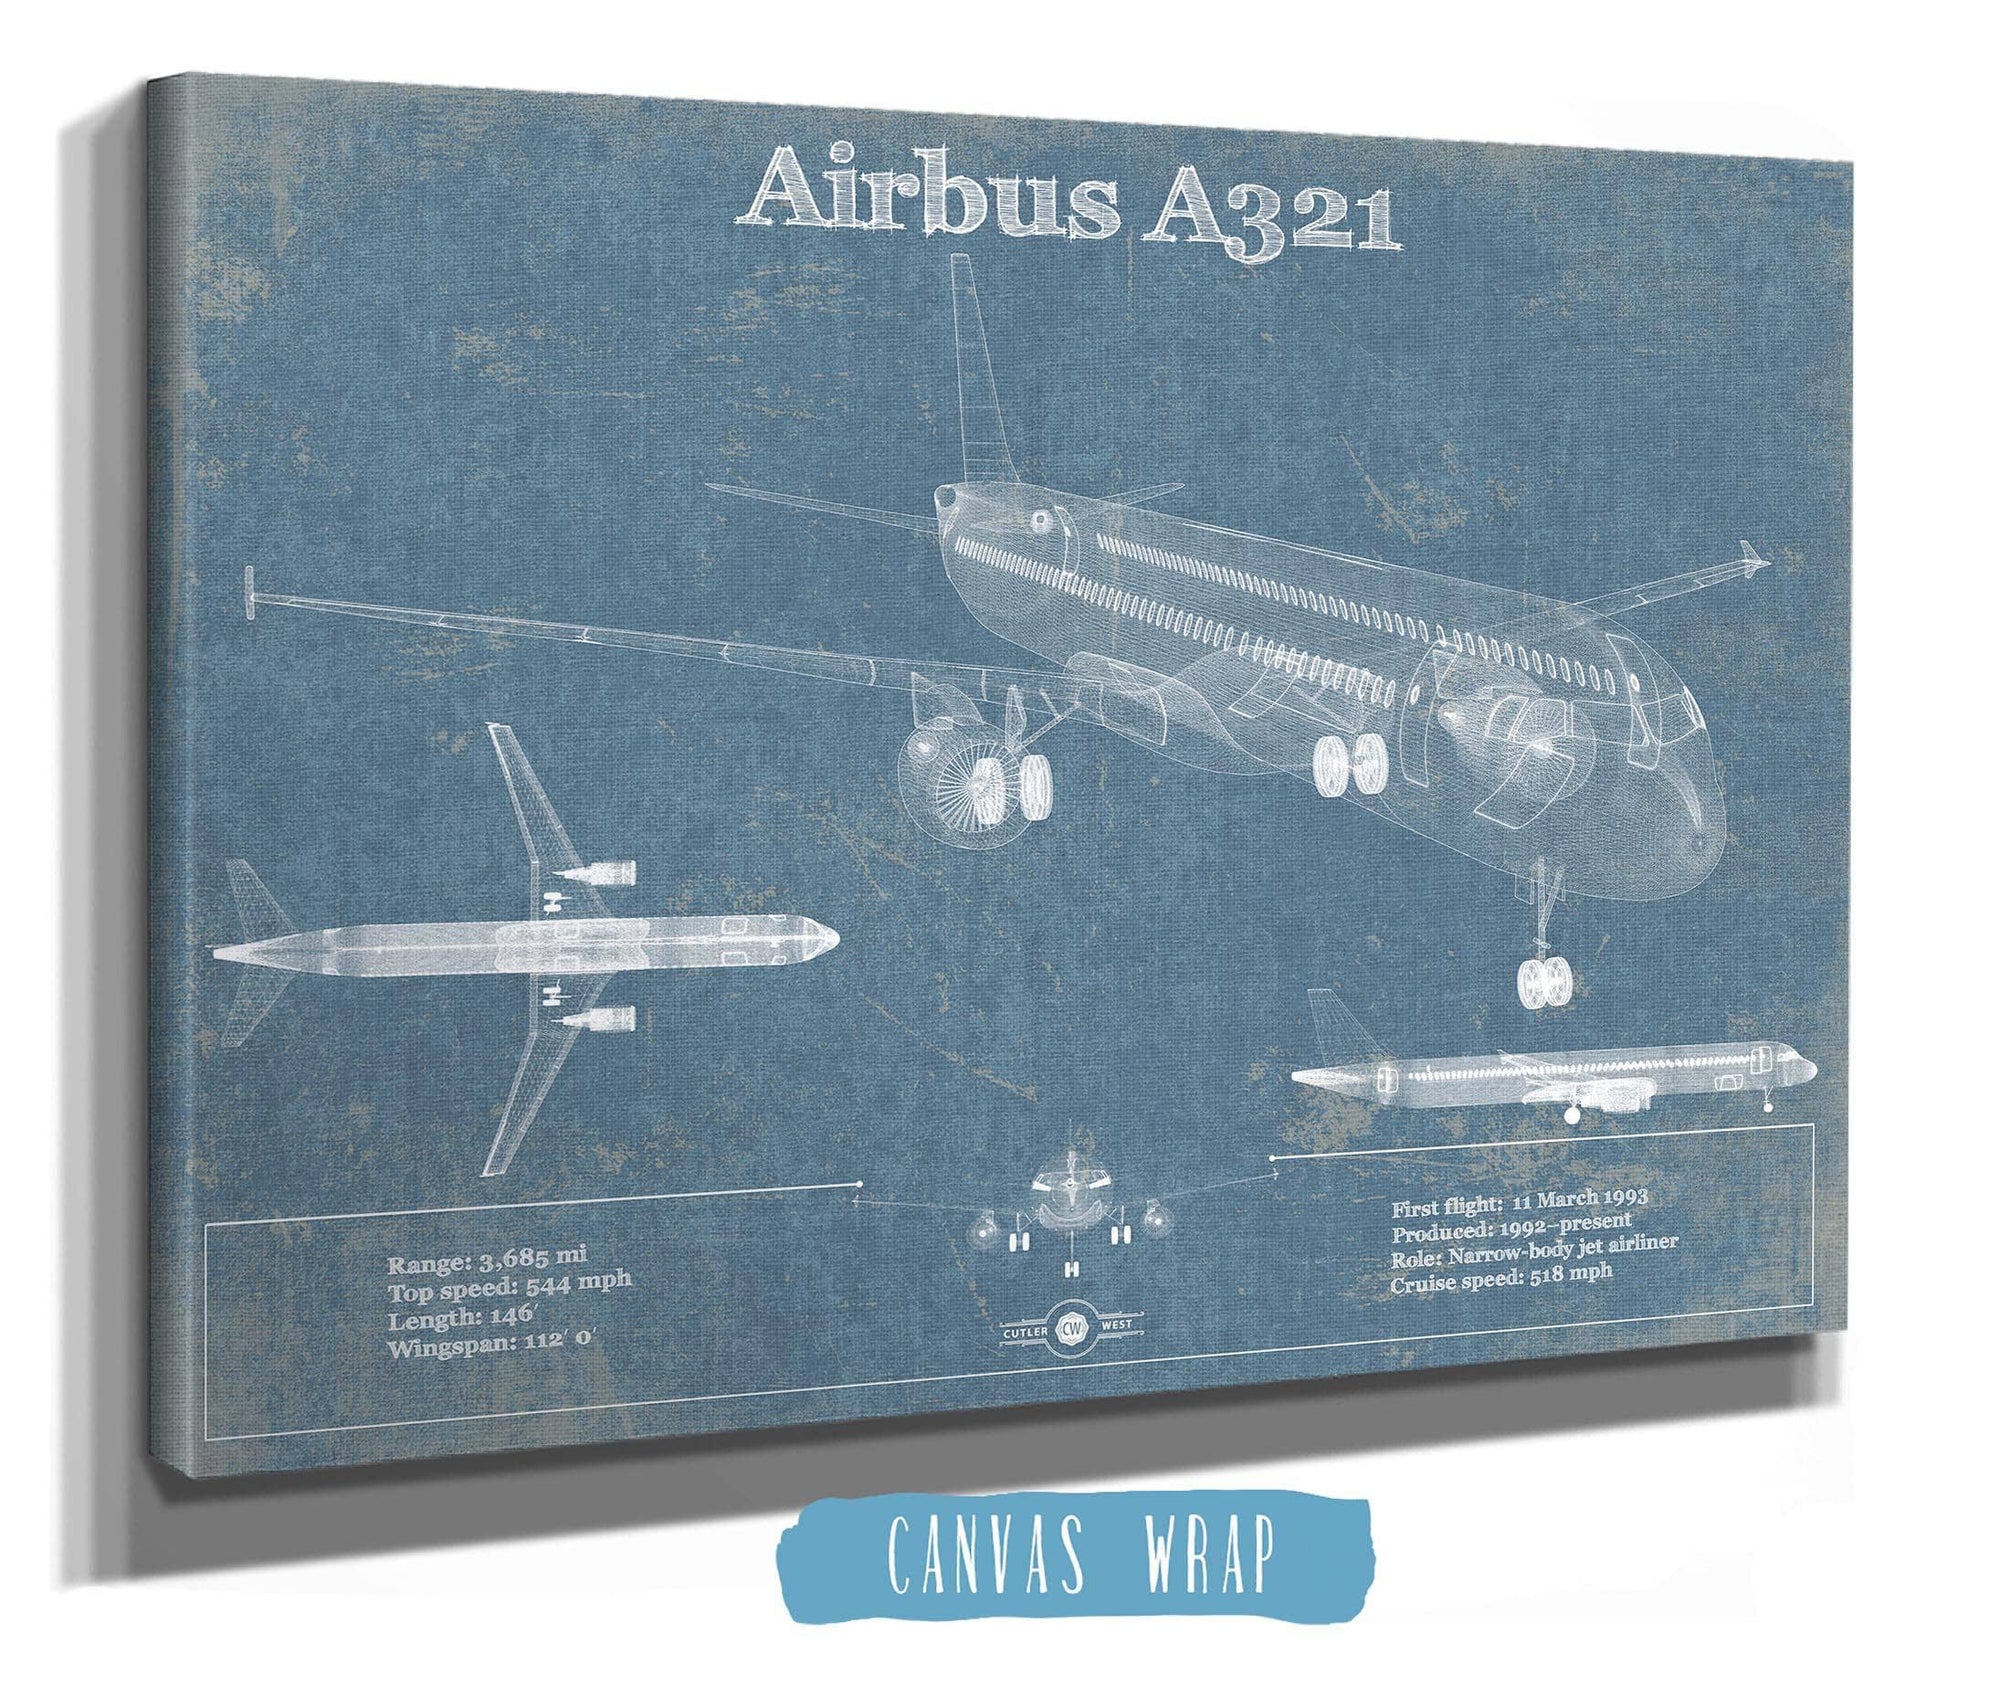 Cutler West Airbus Collection Airbus A321 Vintage Aviation Blueprint Print